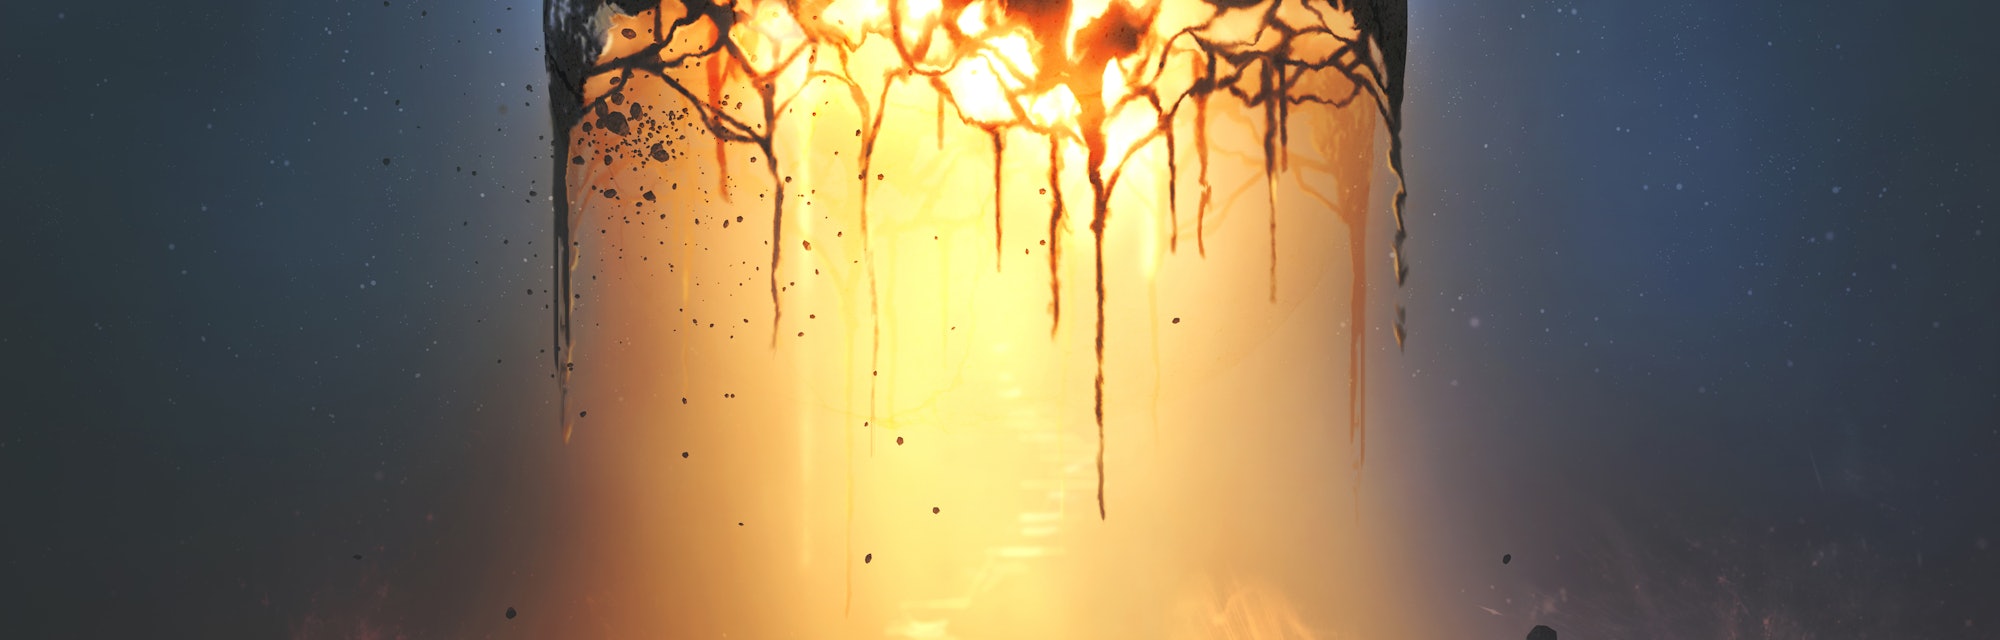 A surreal illustration of fire and lava pouring out from the earth. Digital Illustration. Elements p...